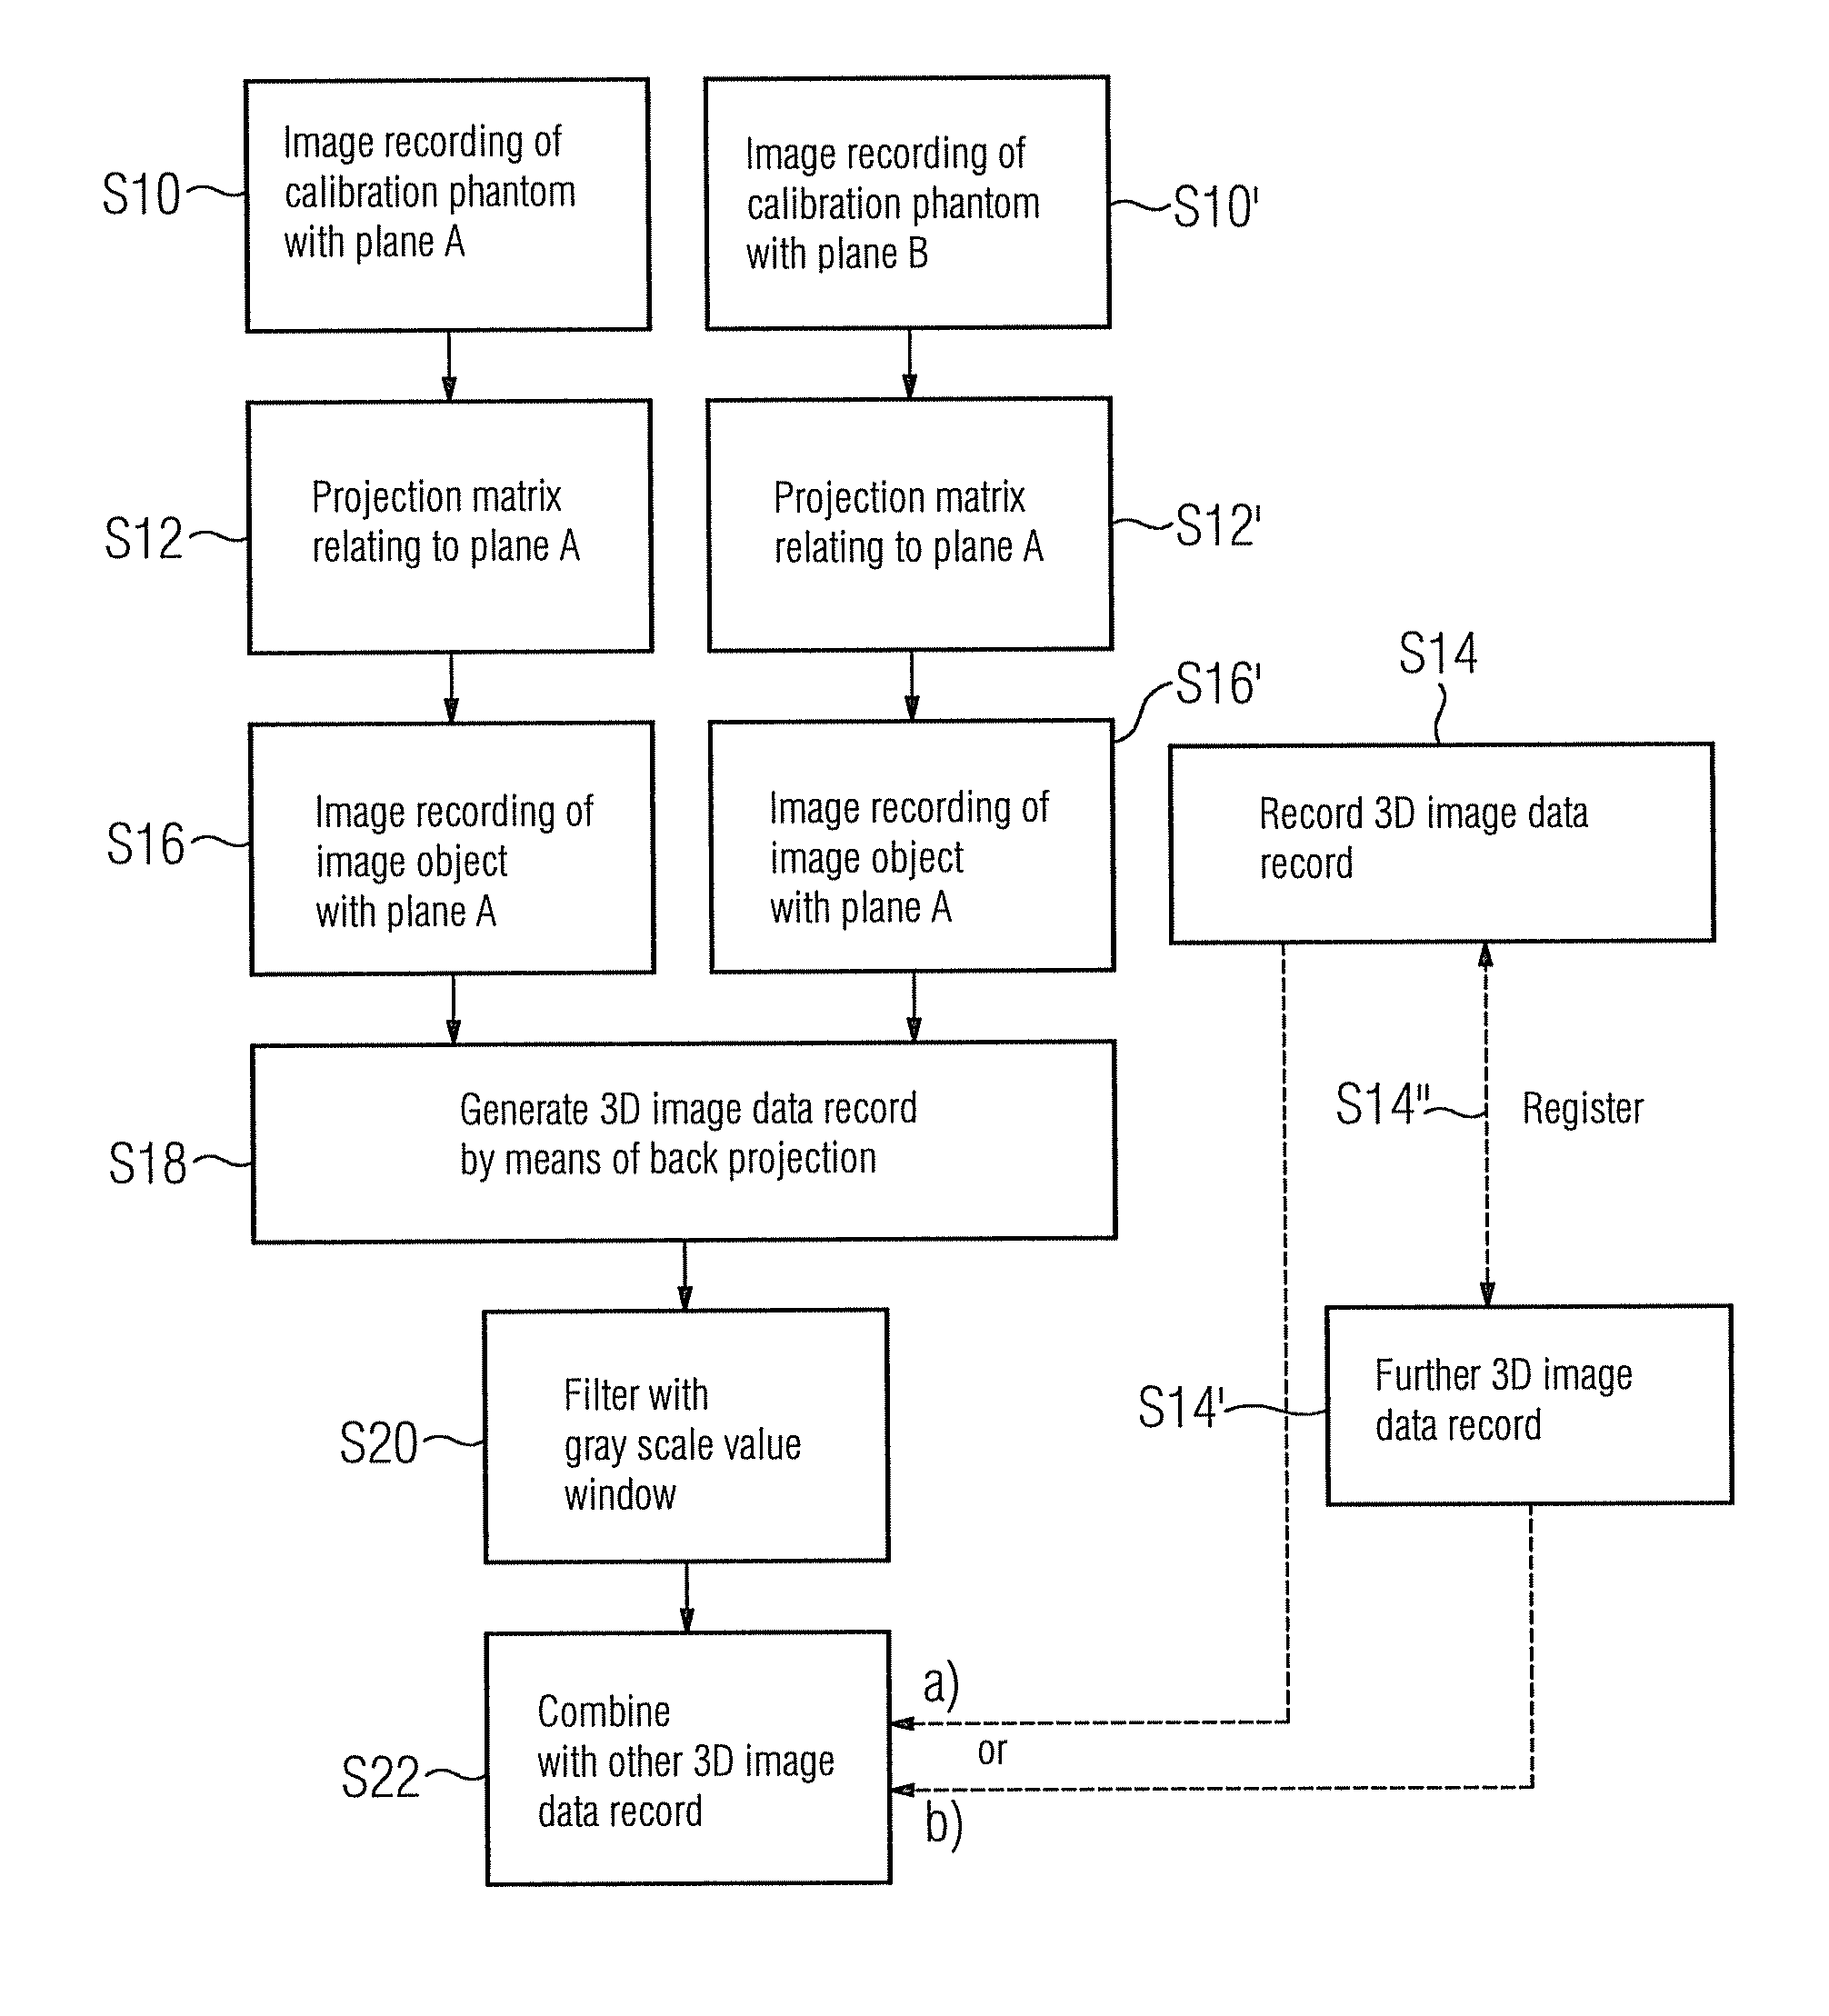 Method for providing a 3D image data record of a physiological object with a metal object therein